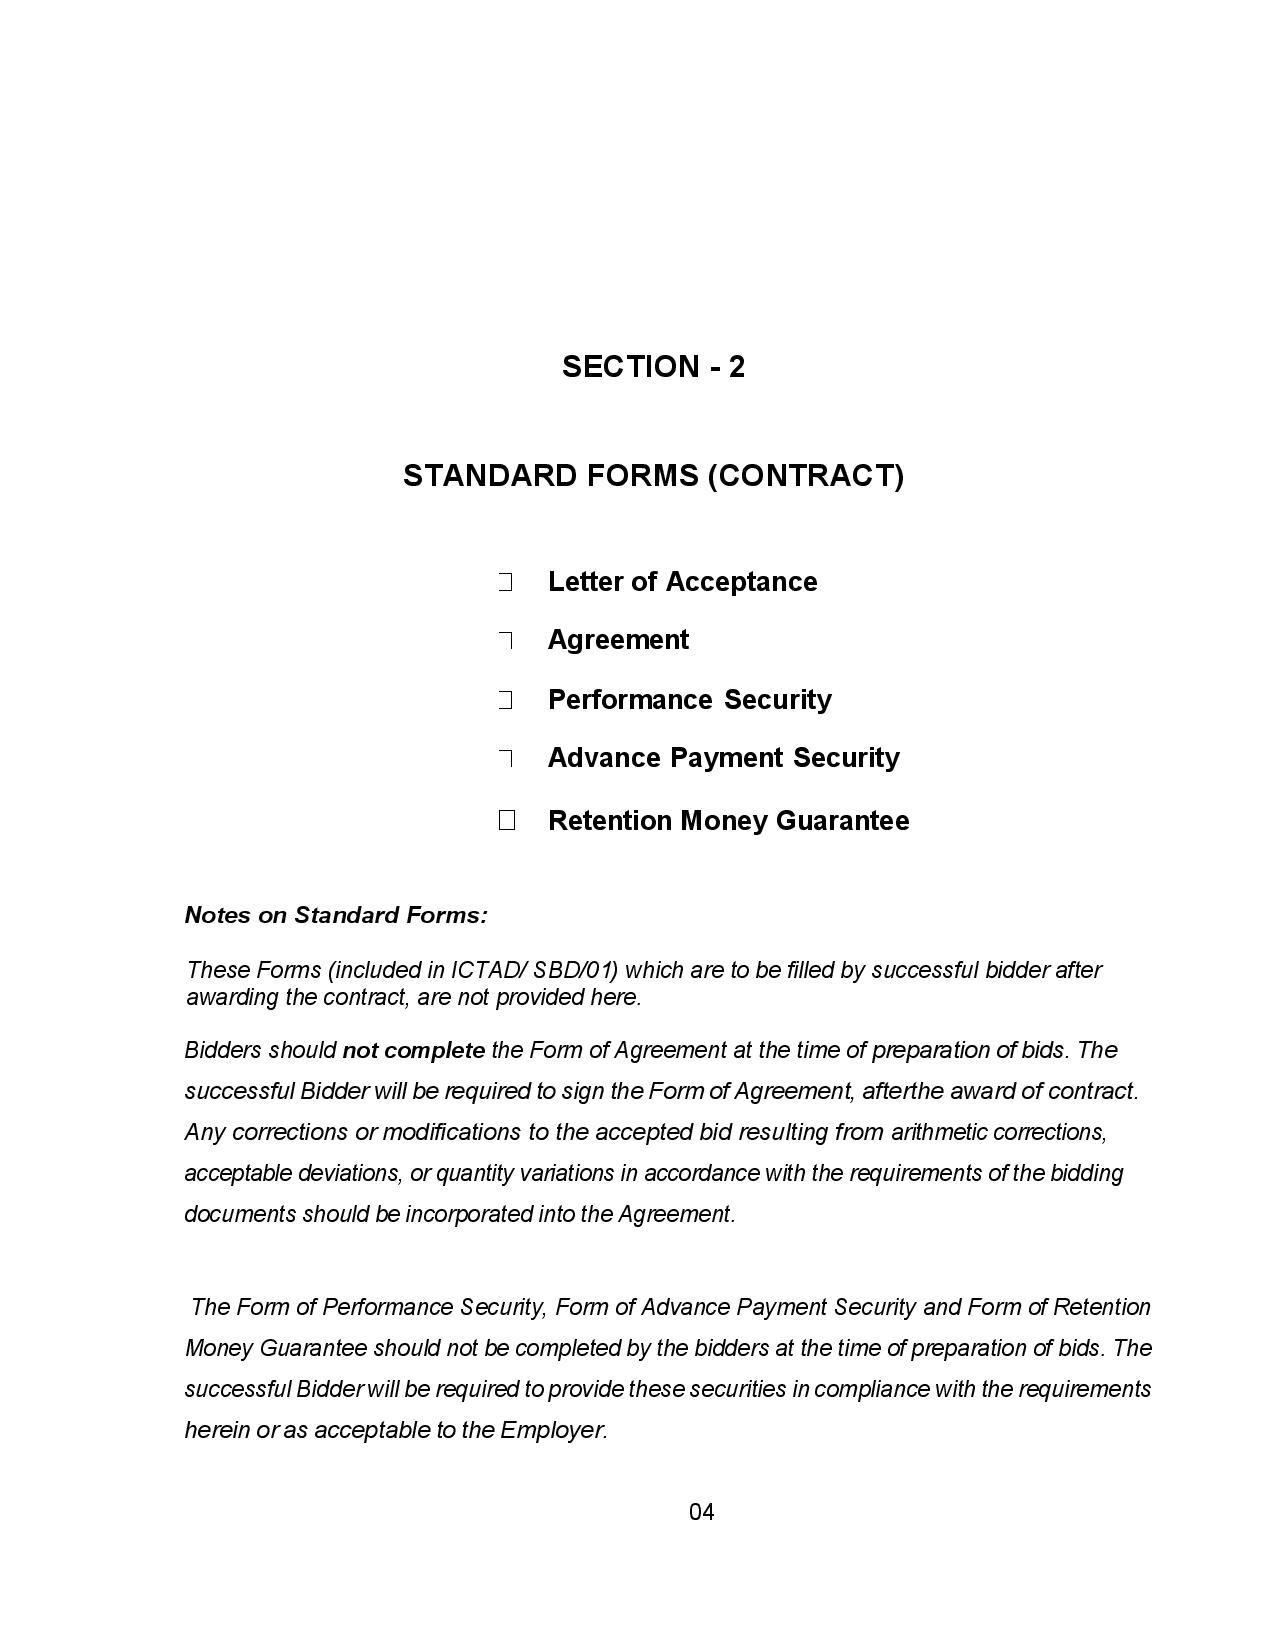 Tender Document page 006